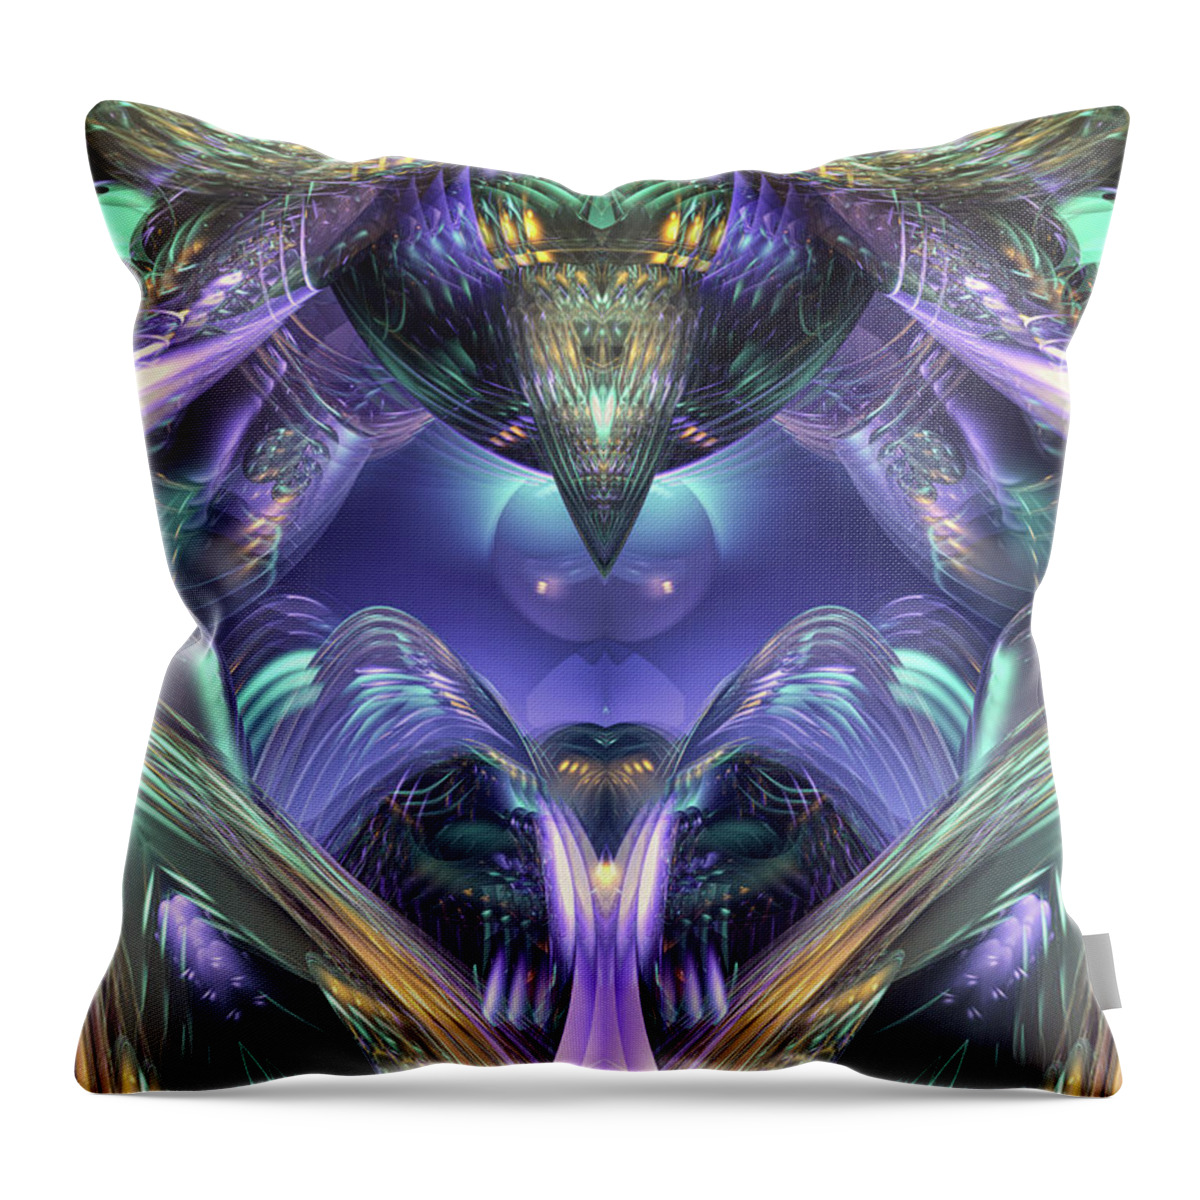 Glass Throw Pillow featuring the digital art Abstract Crystal Structure by Phil Perkins